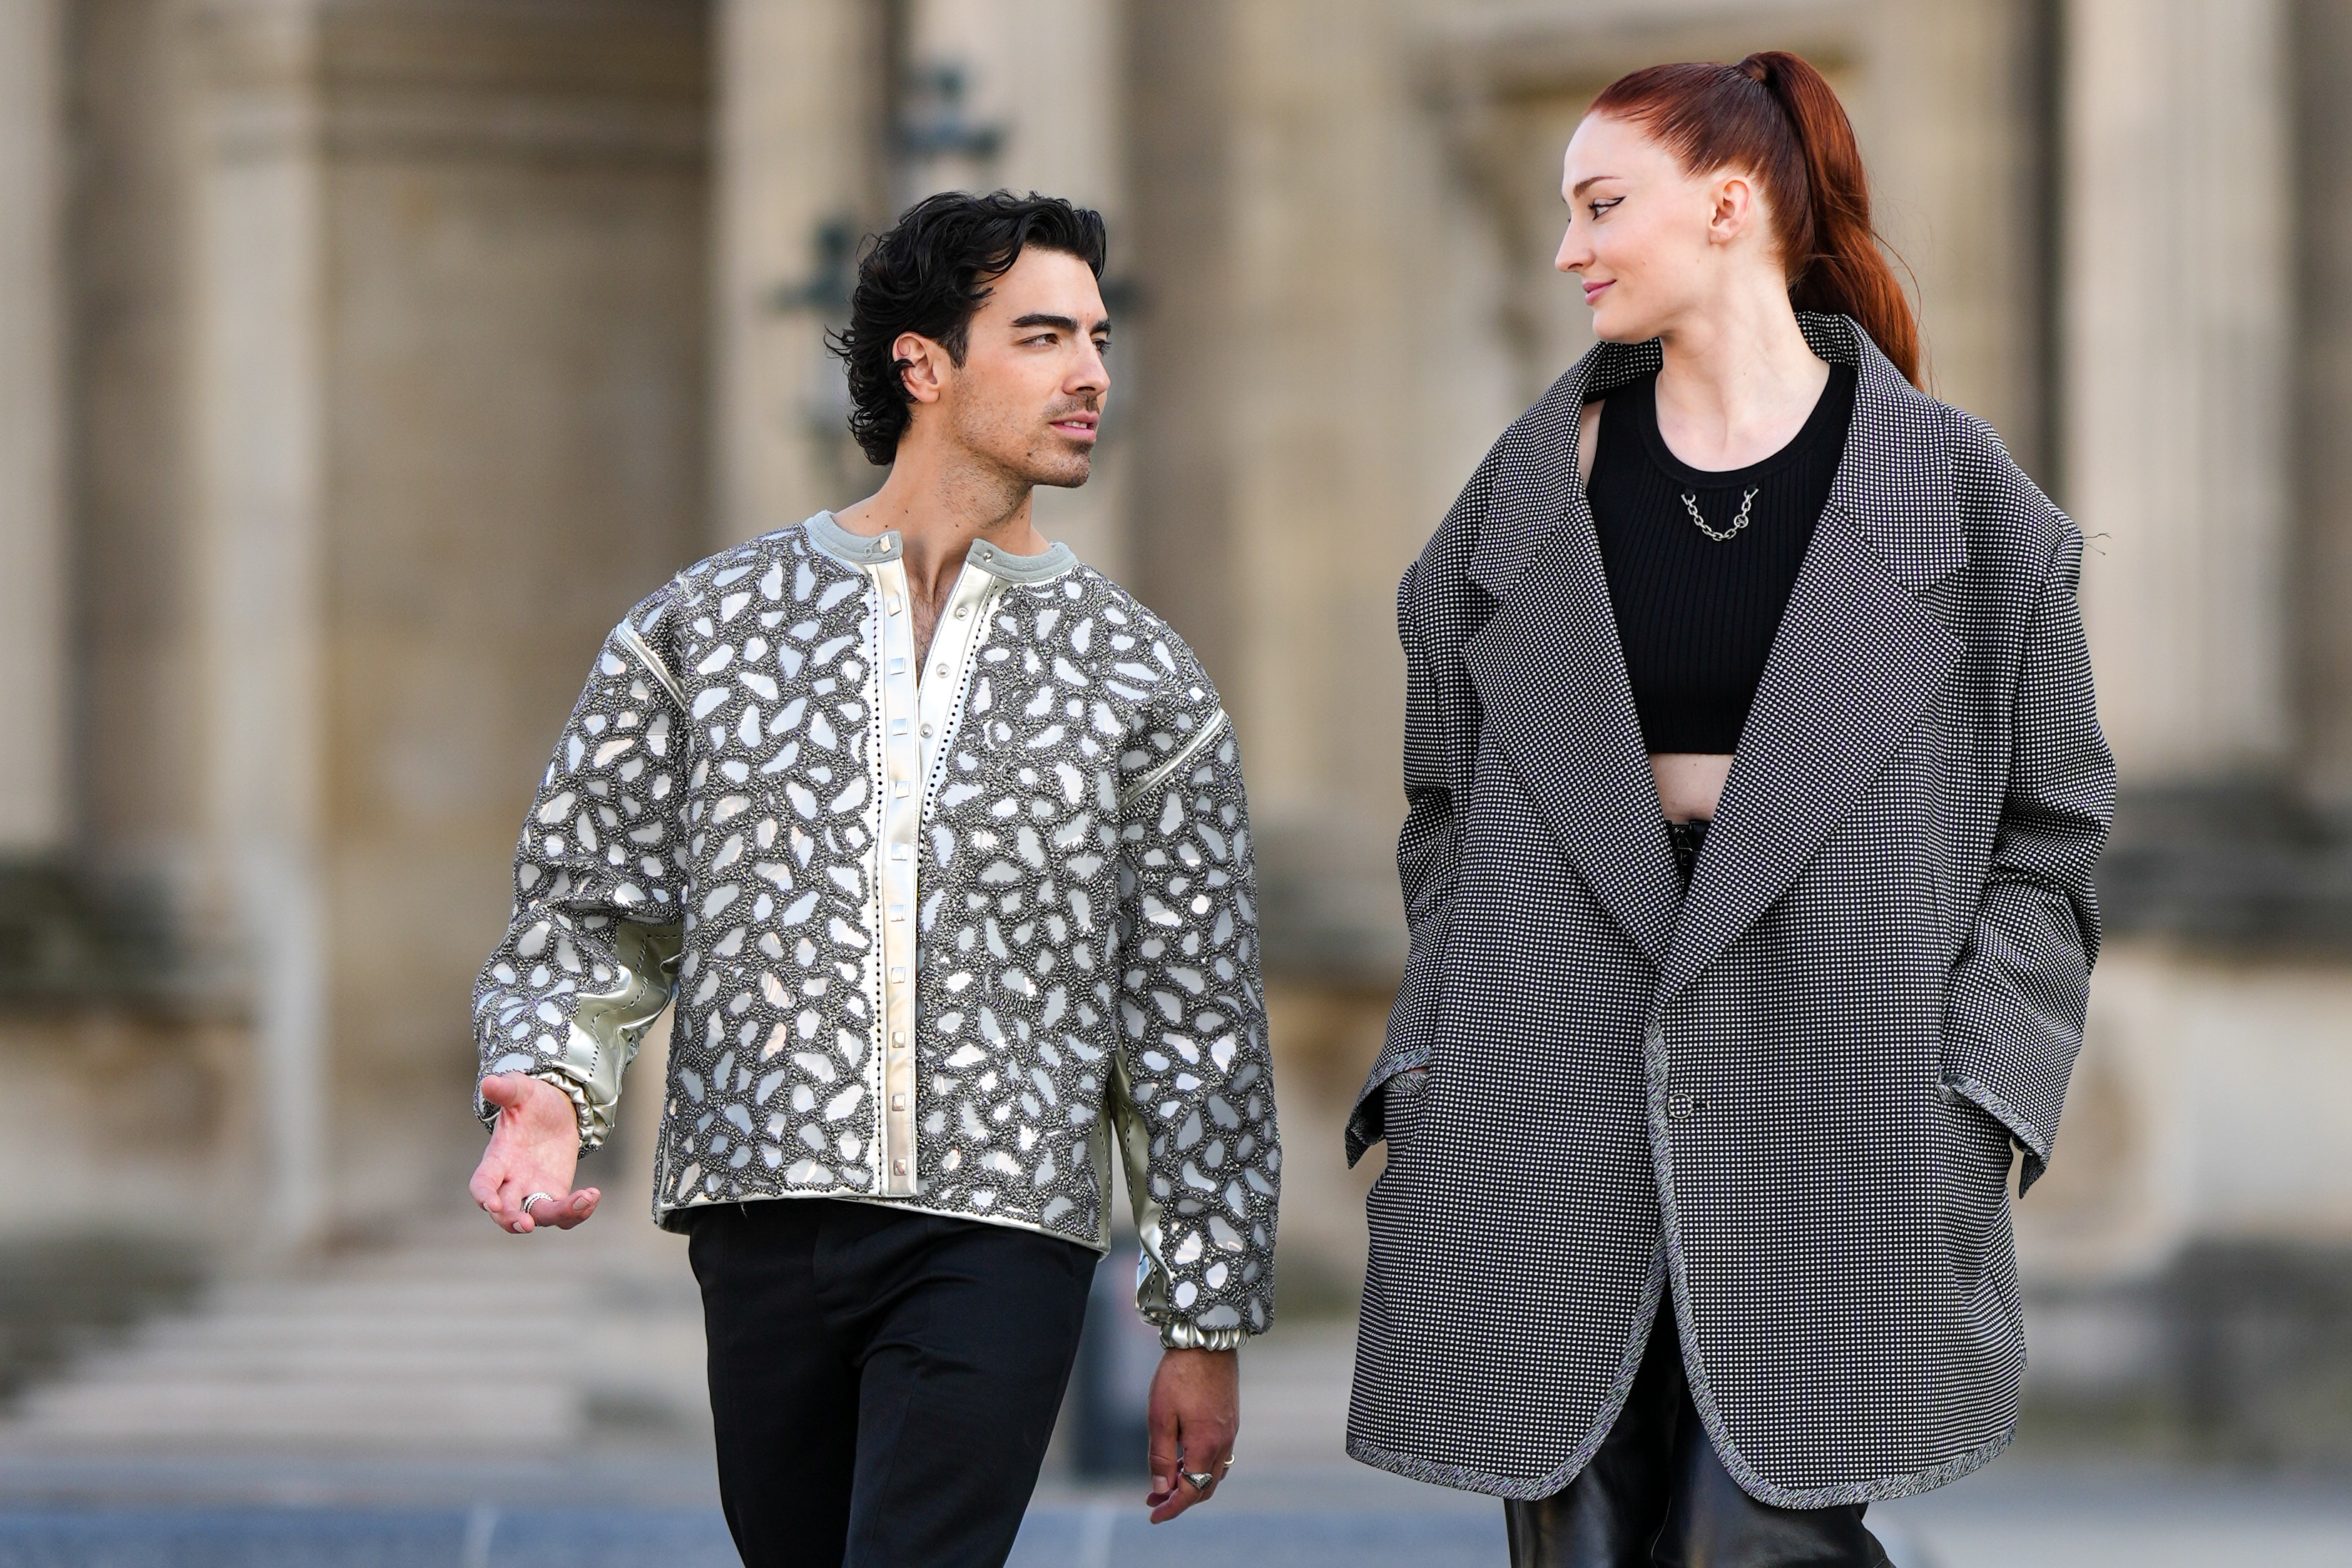 Joe and Sophie walking together and wearing jackets